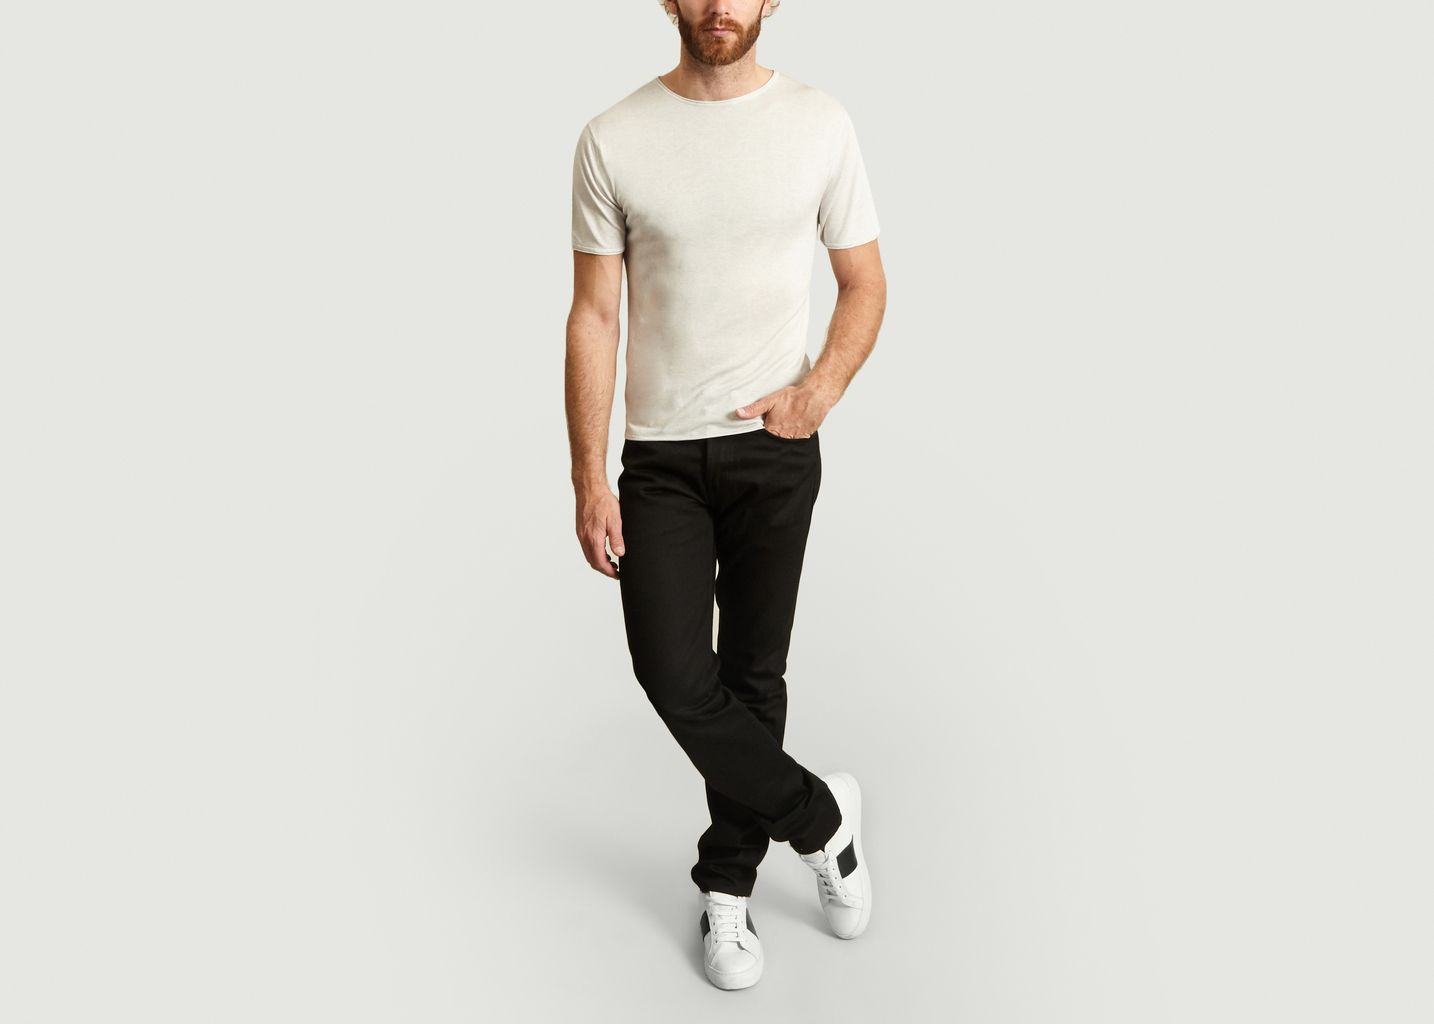 ED-80 Tinted Slim Tapered Selvedge Jeans - Edwin